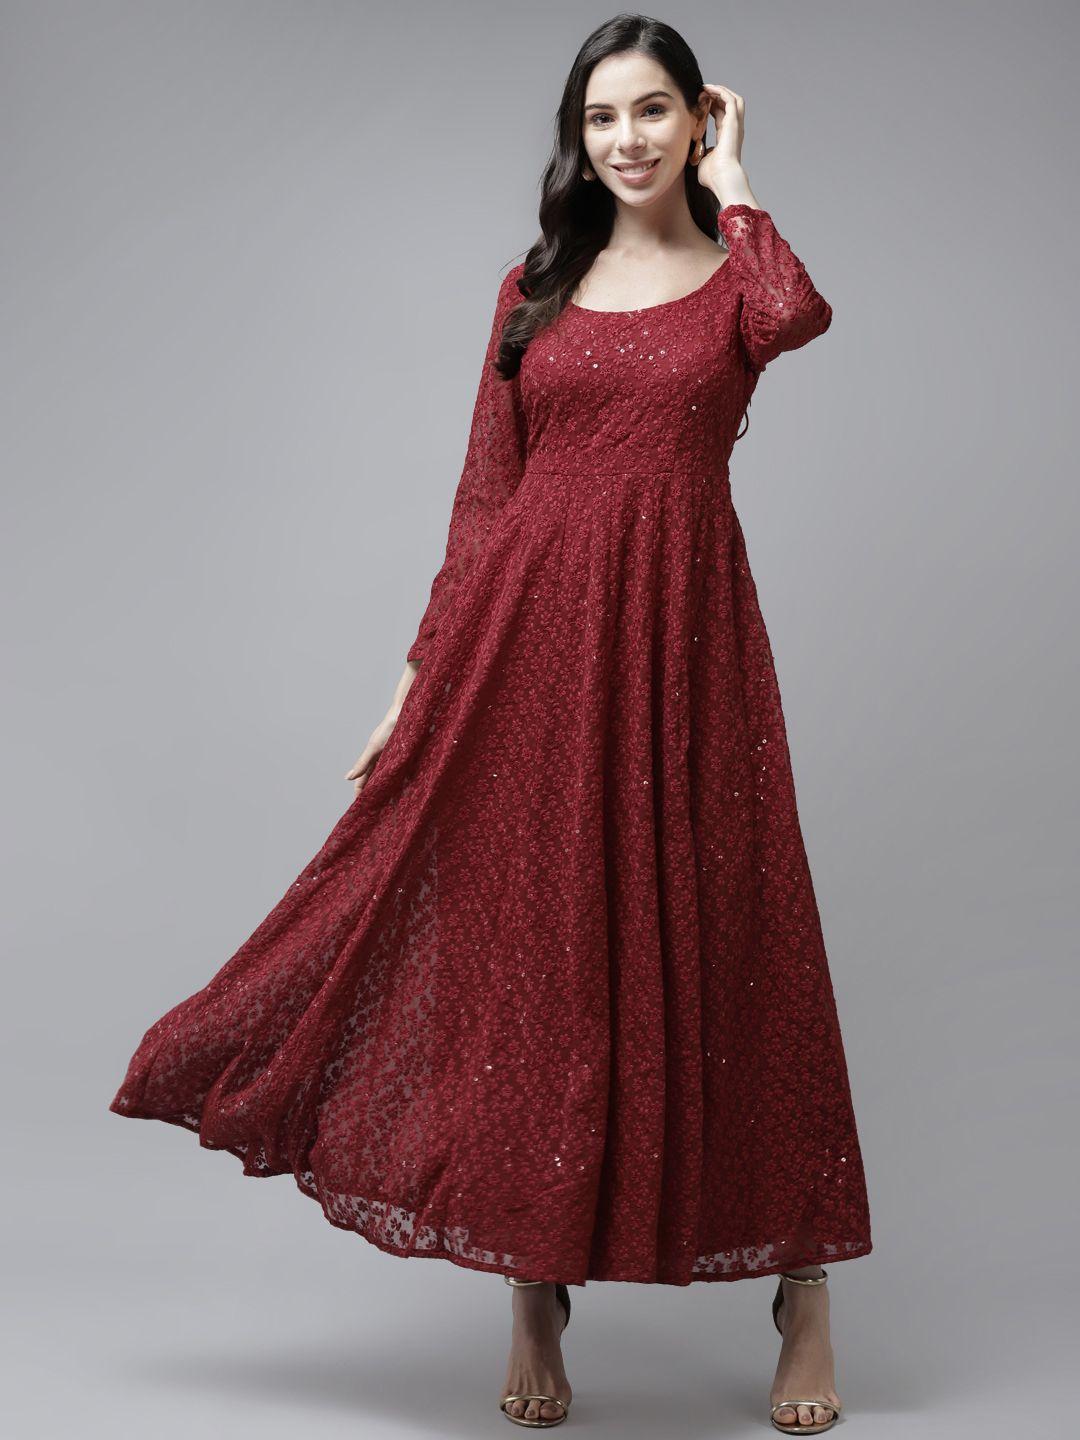 panit-women-red-ethnic-motifs-embroidered-ethnic-maxi-dress